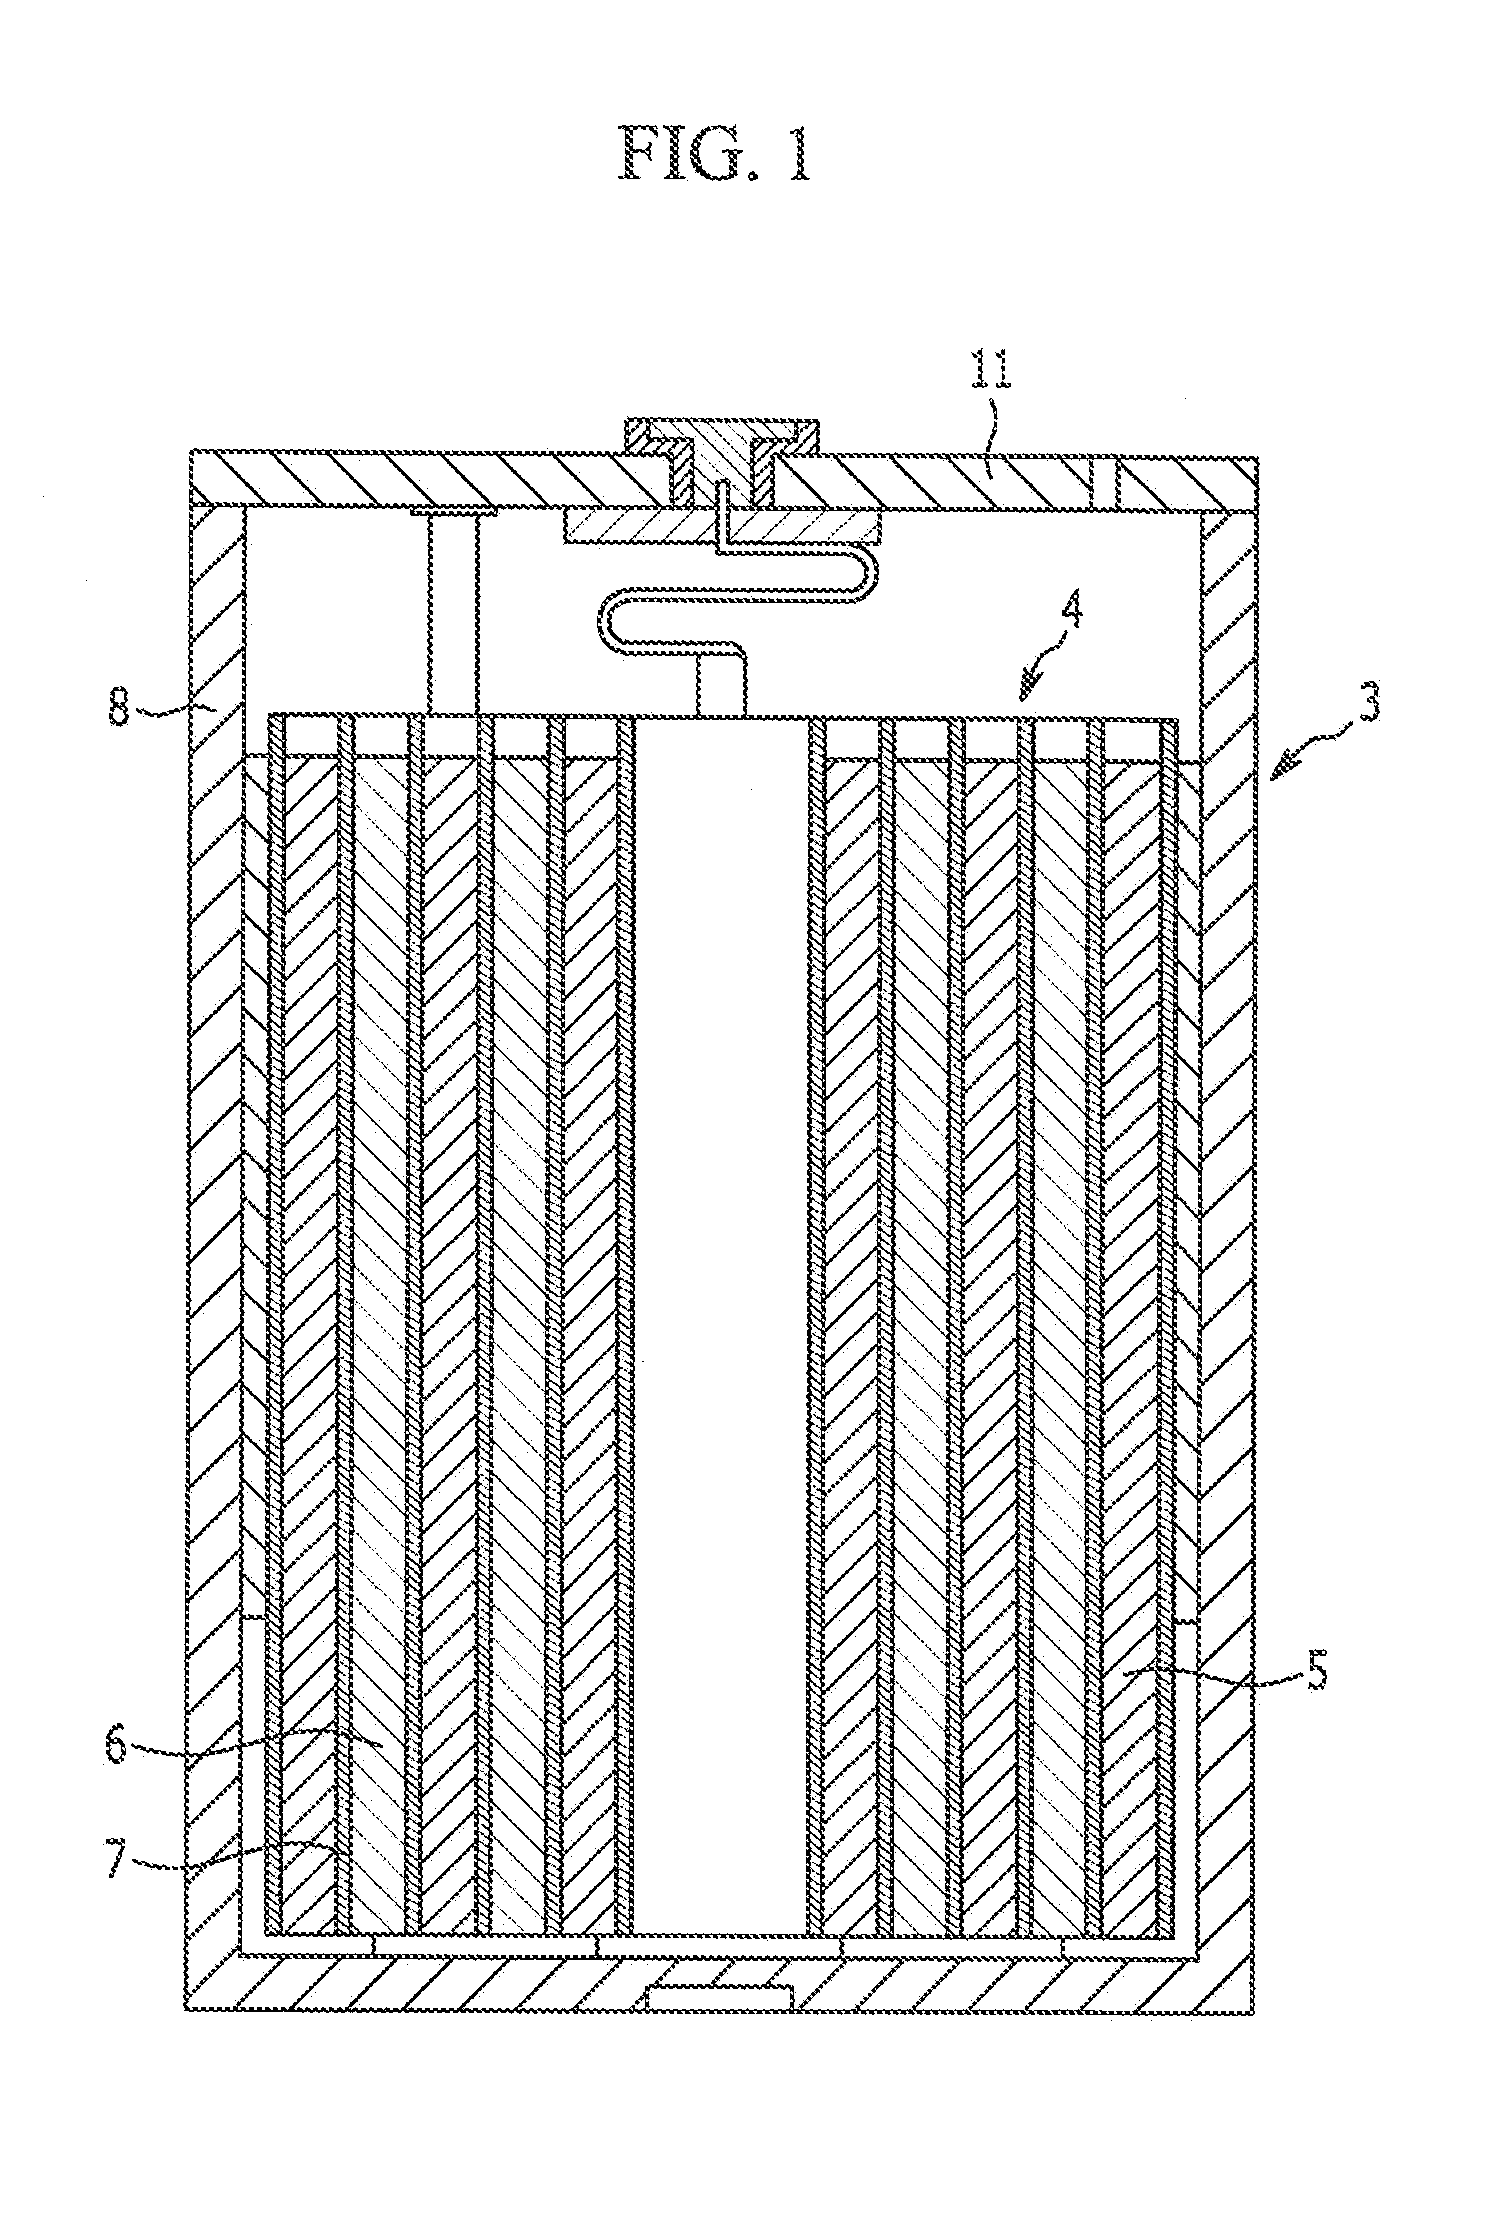 Electrolyte for rechargeable lithium battery, and rechargeable lithium battery including same